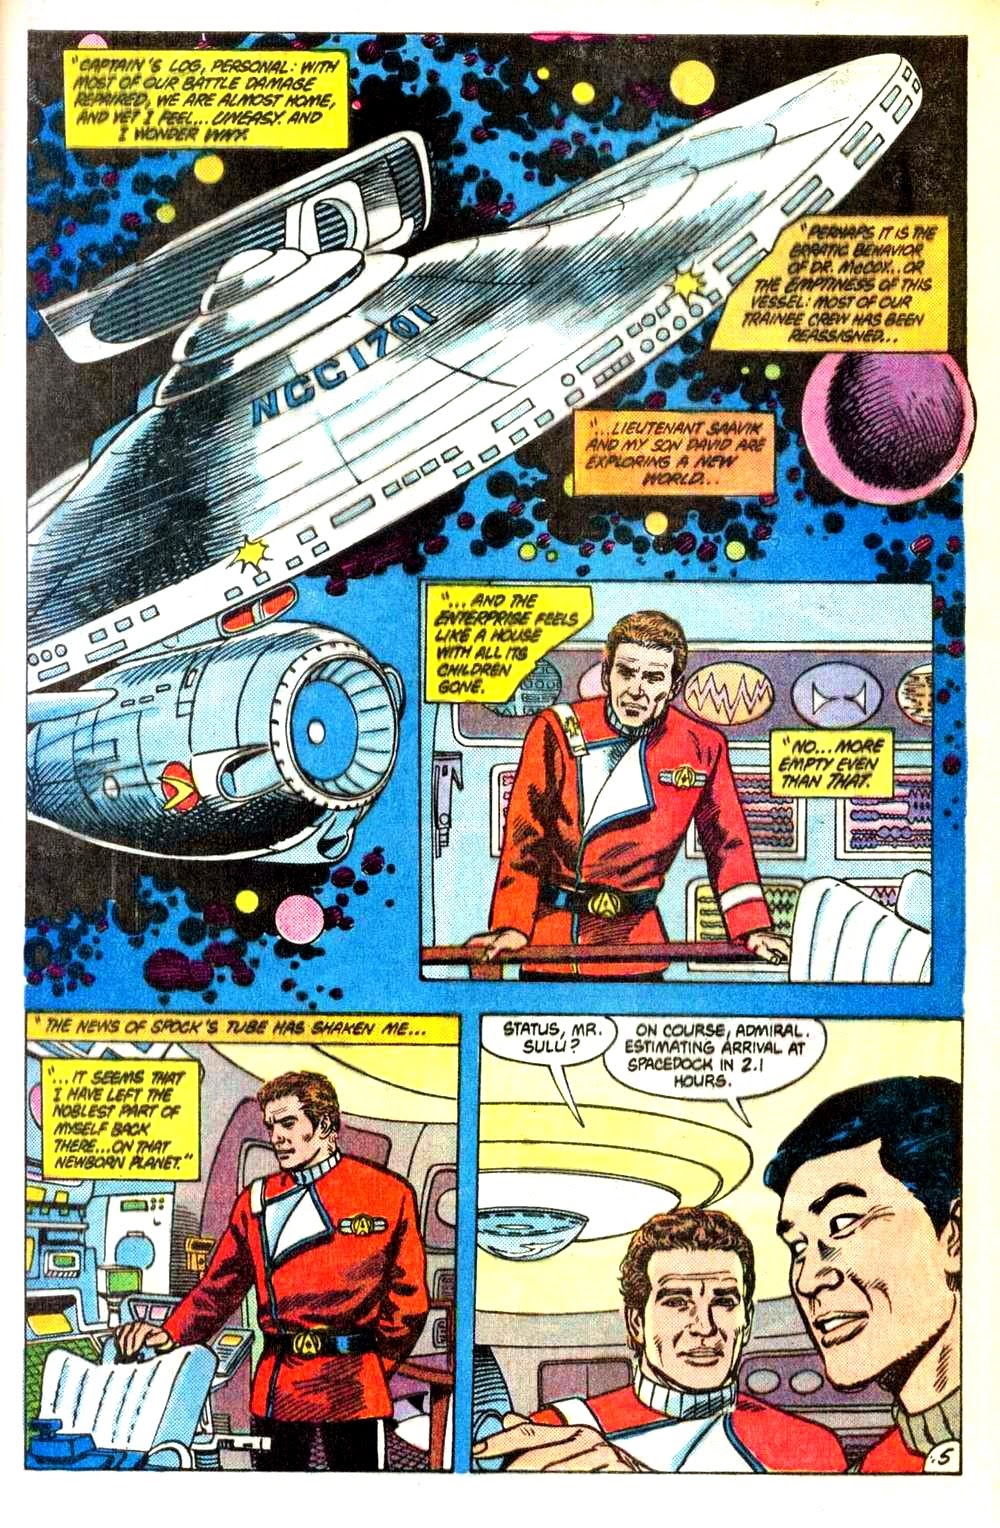 Read online Star Trek III: The Search for Spock comic -  Issue # Full - 7